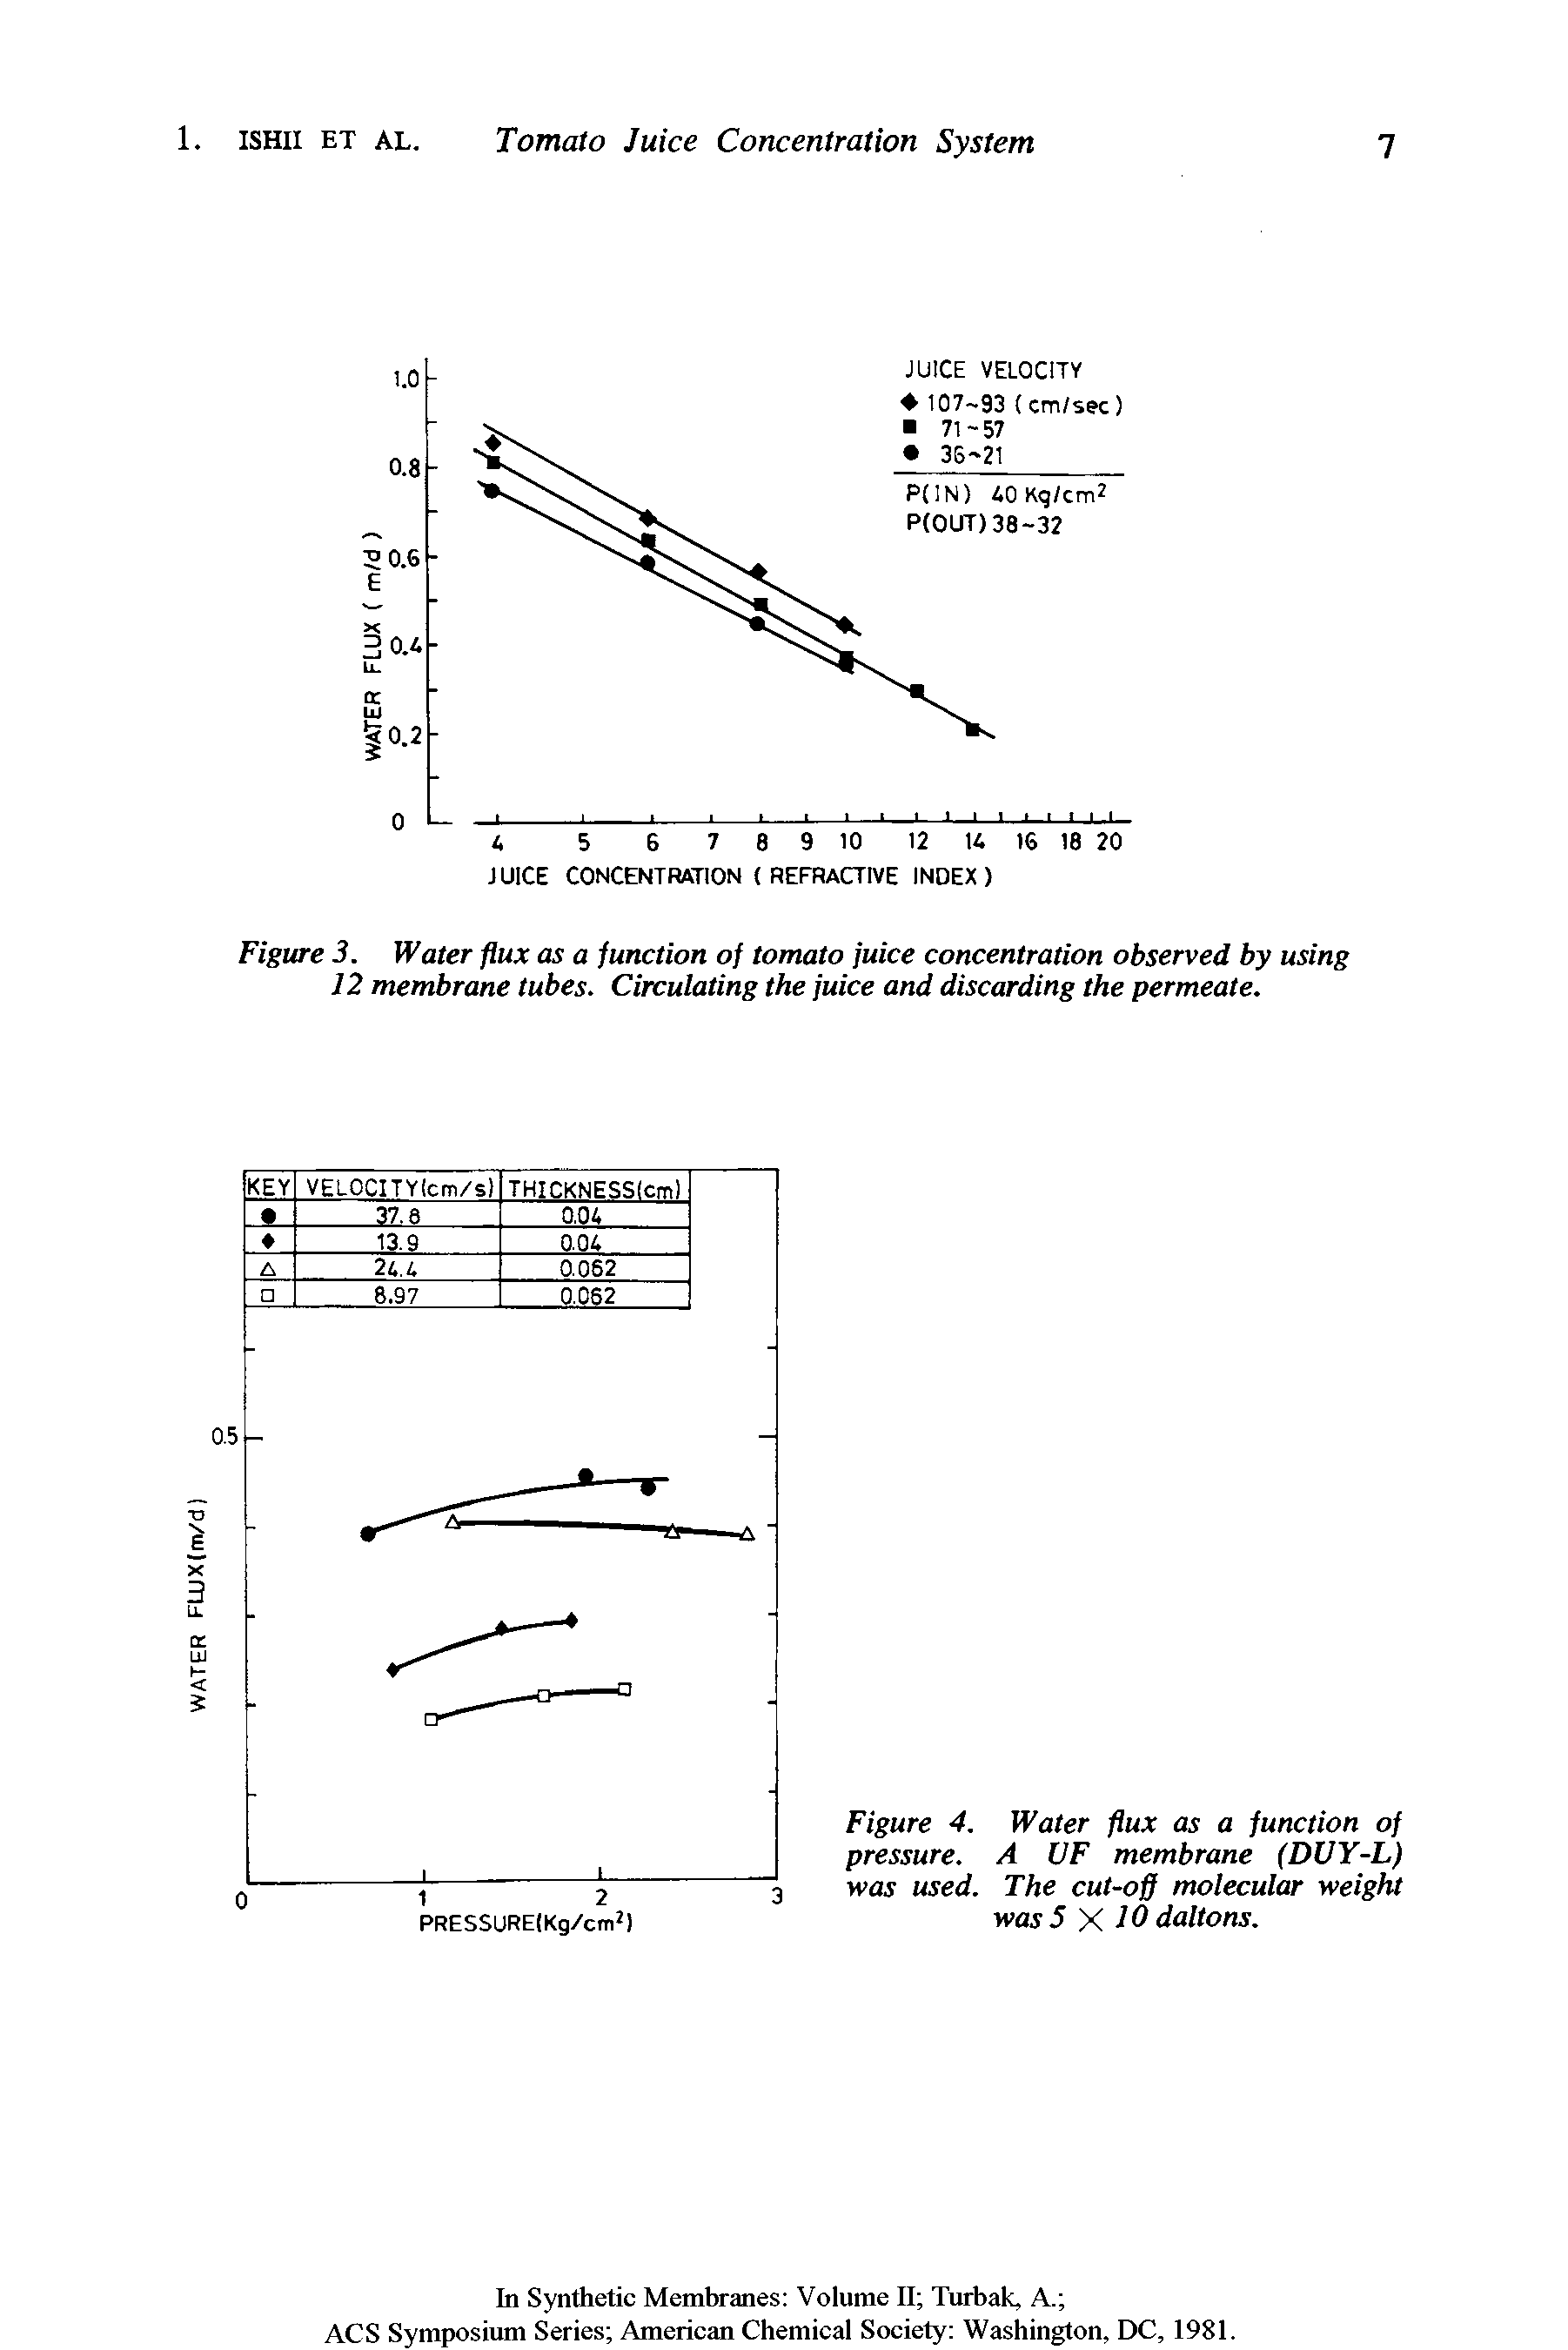 Figure 3. Water flux as a function of tomato juice concentration observed by using 12 membrane tubes. Circulating the juice and discarding the permeate.